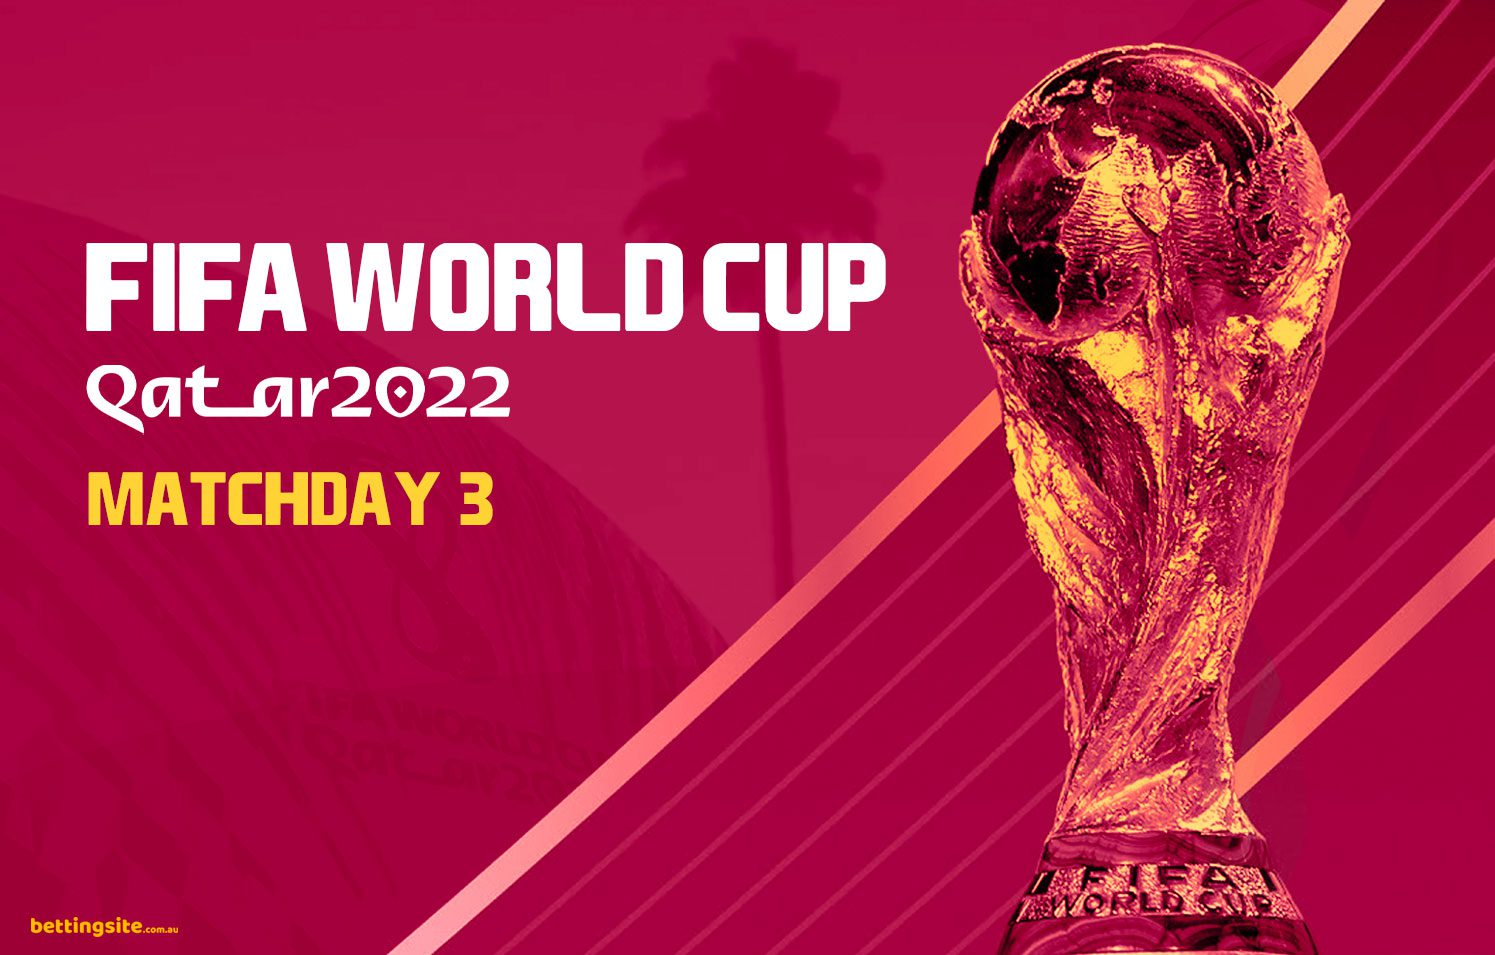 Qatar 2022 World Cup Matchday 3 preview